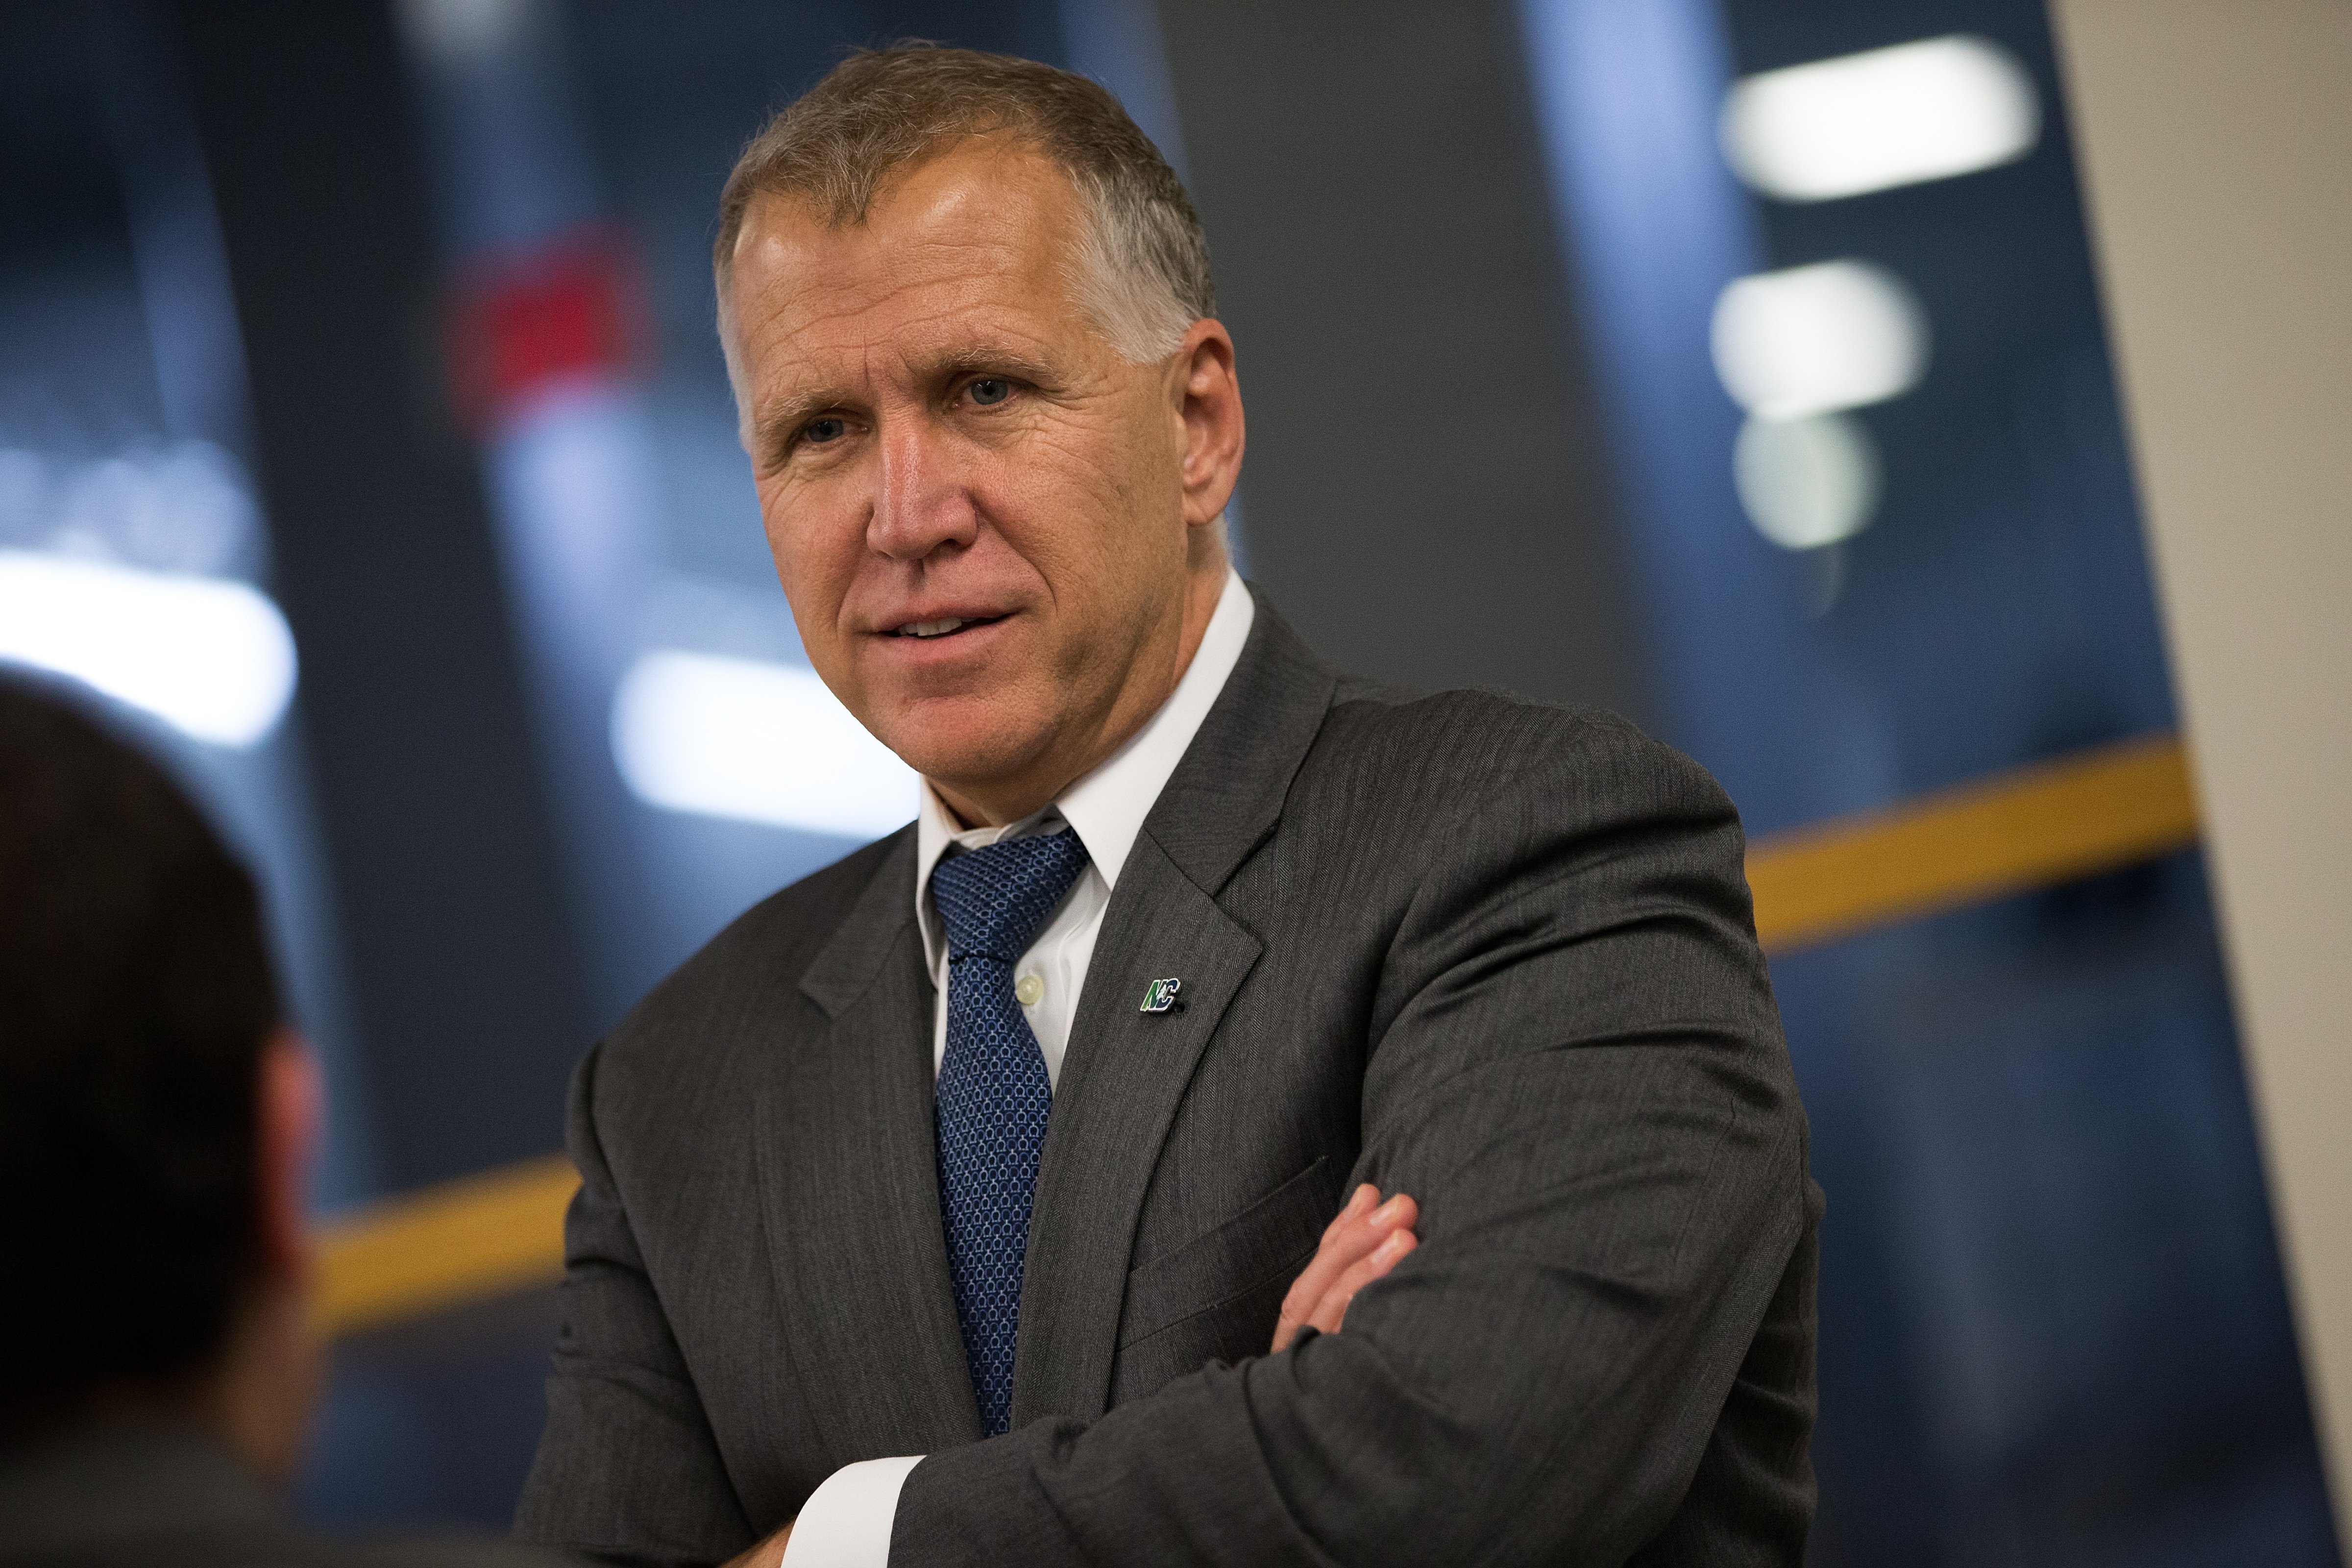 Sen. Thom Tillis speaks with an aide after a vote at the U.S. Capitol in Washington, D.C., on May 9, 2016.